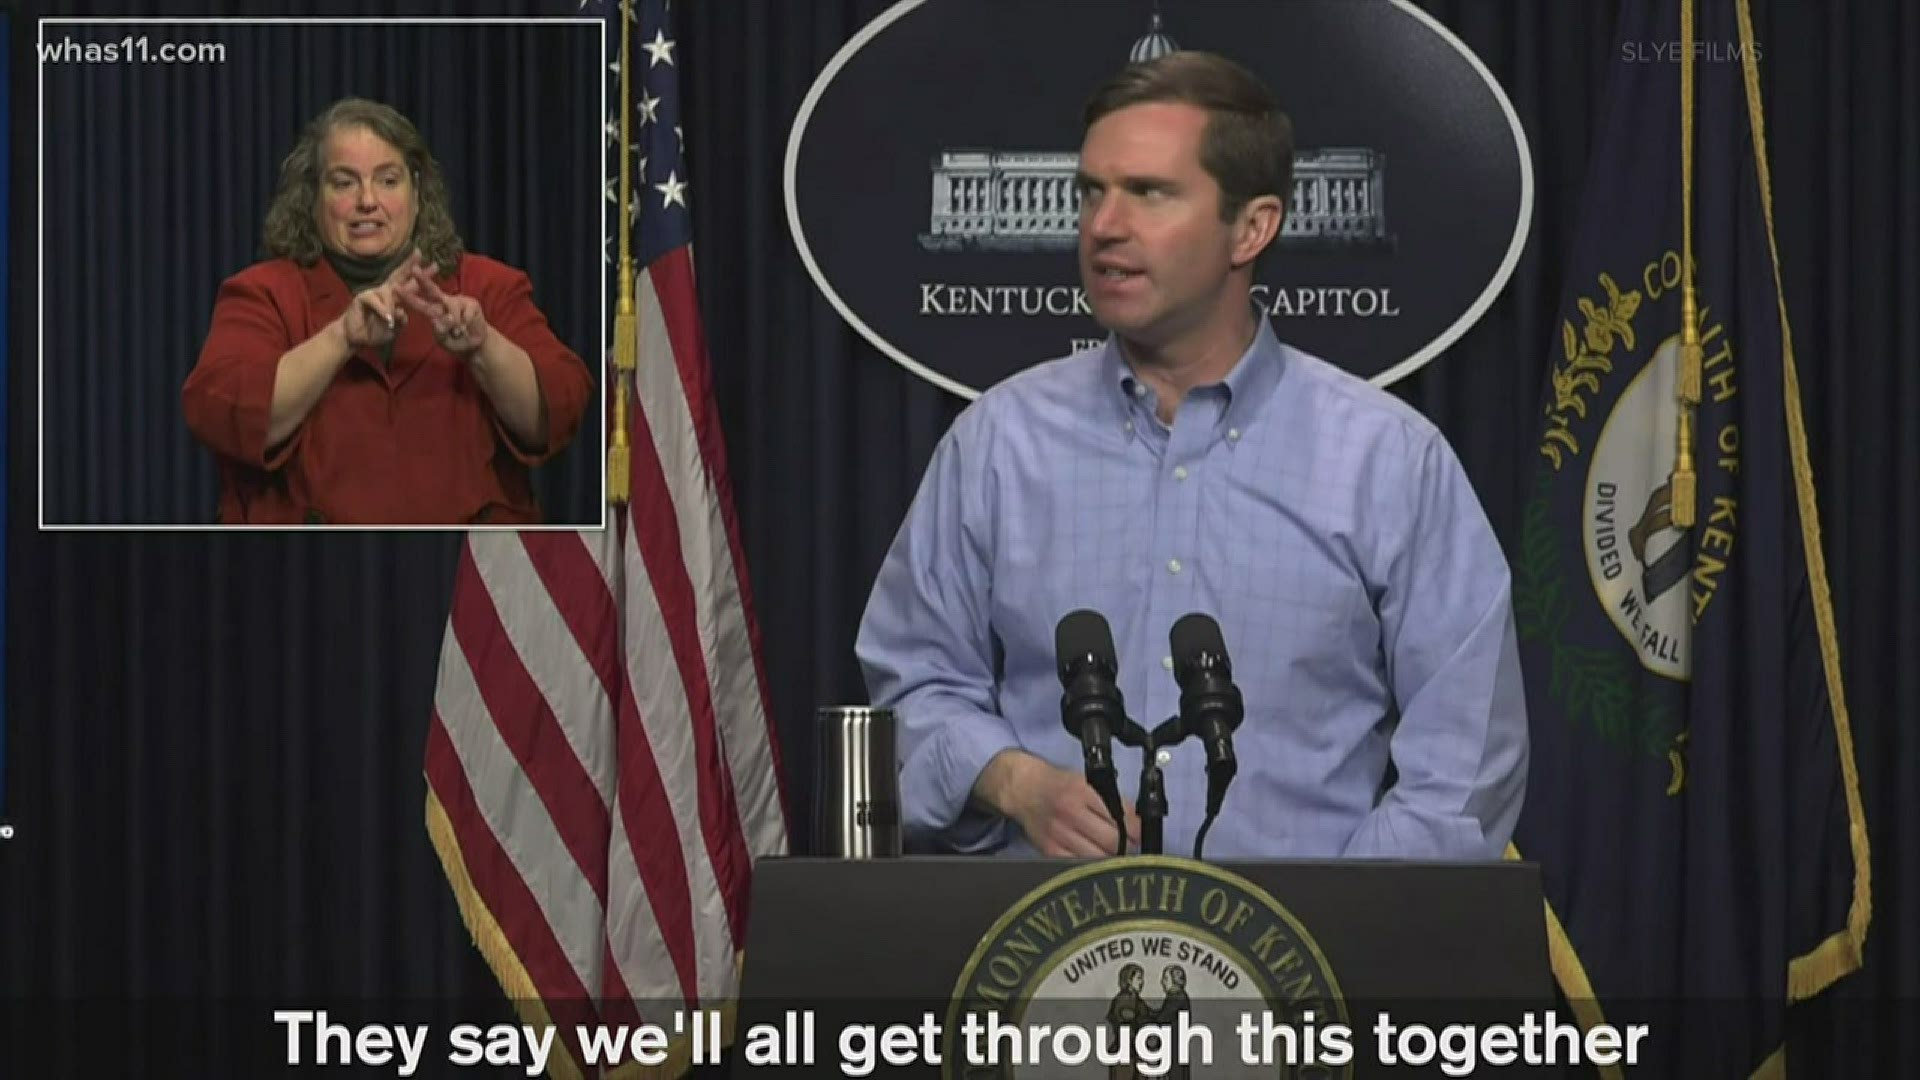 Wedding photographers Jamie Ogles Slye and Andy Slye created a parody song about Andy Beshear's press conferences at 5 p.m.